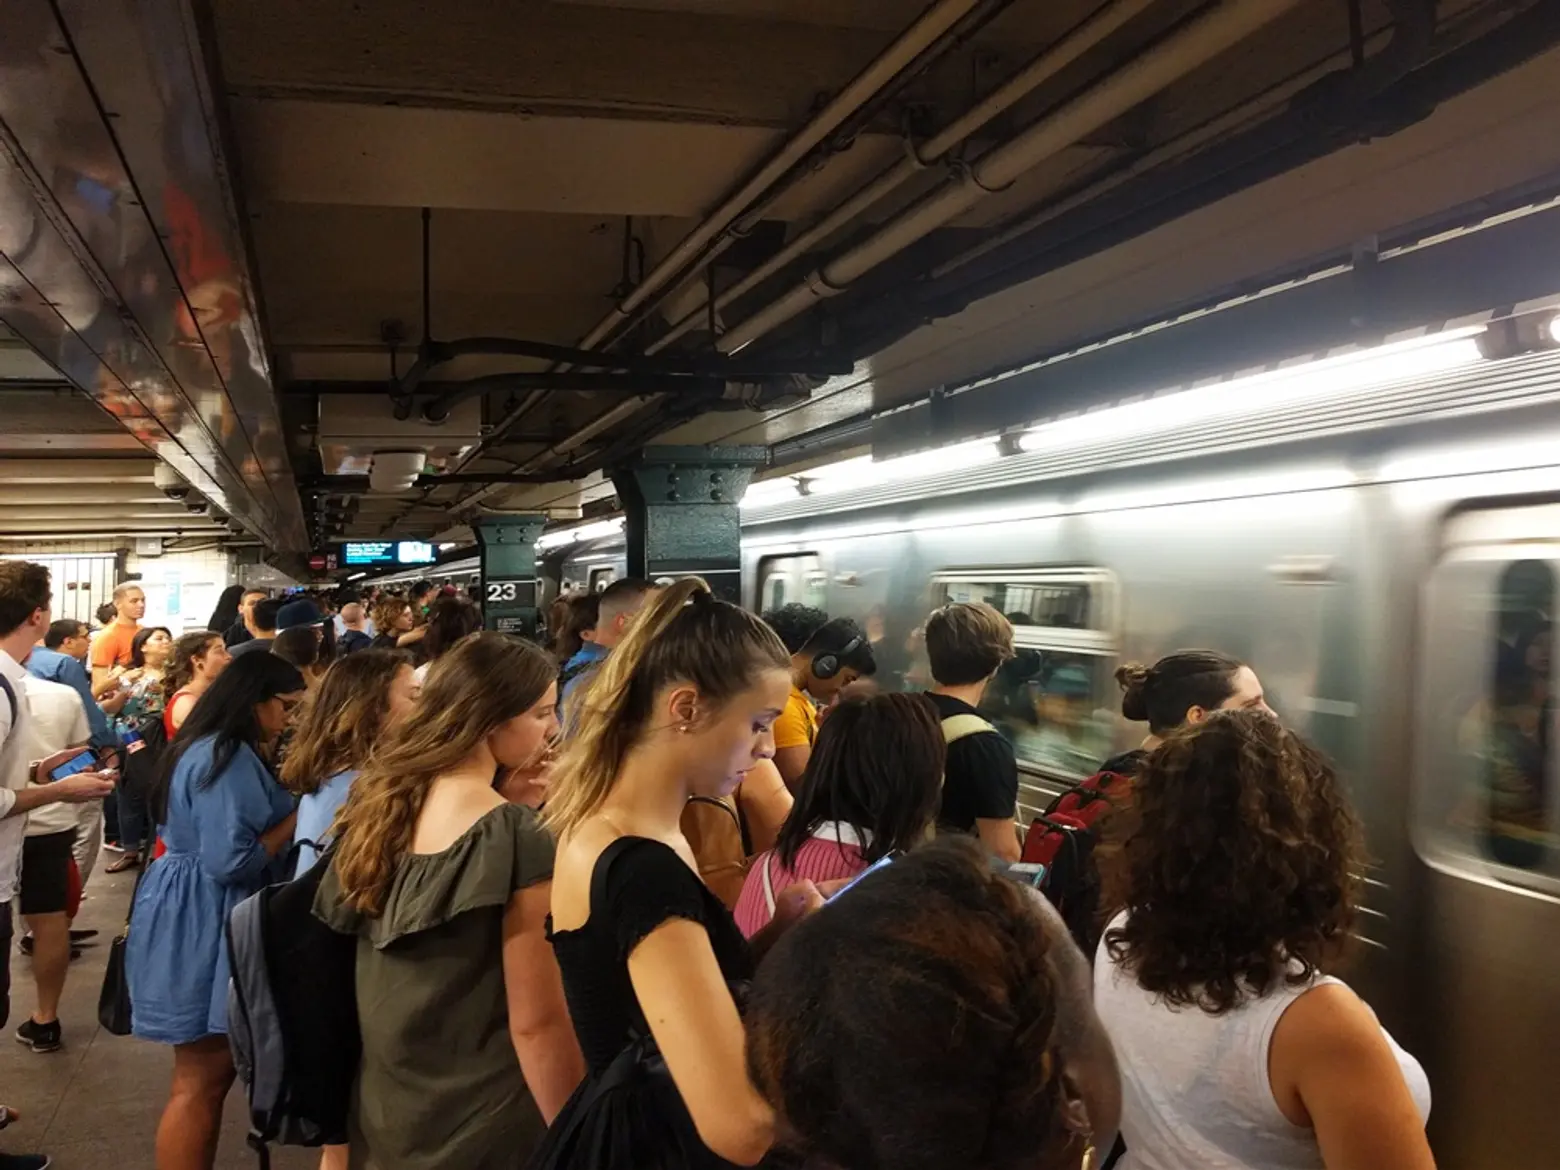 Overcrowding and ‘dwell time’ are why NYC’s subway system is failing